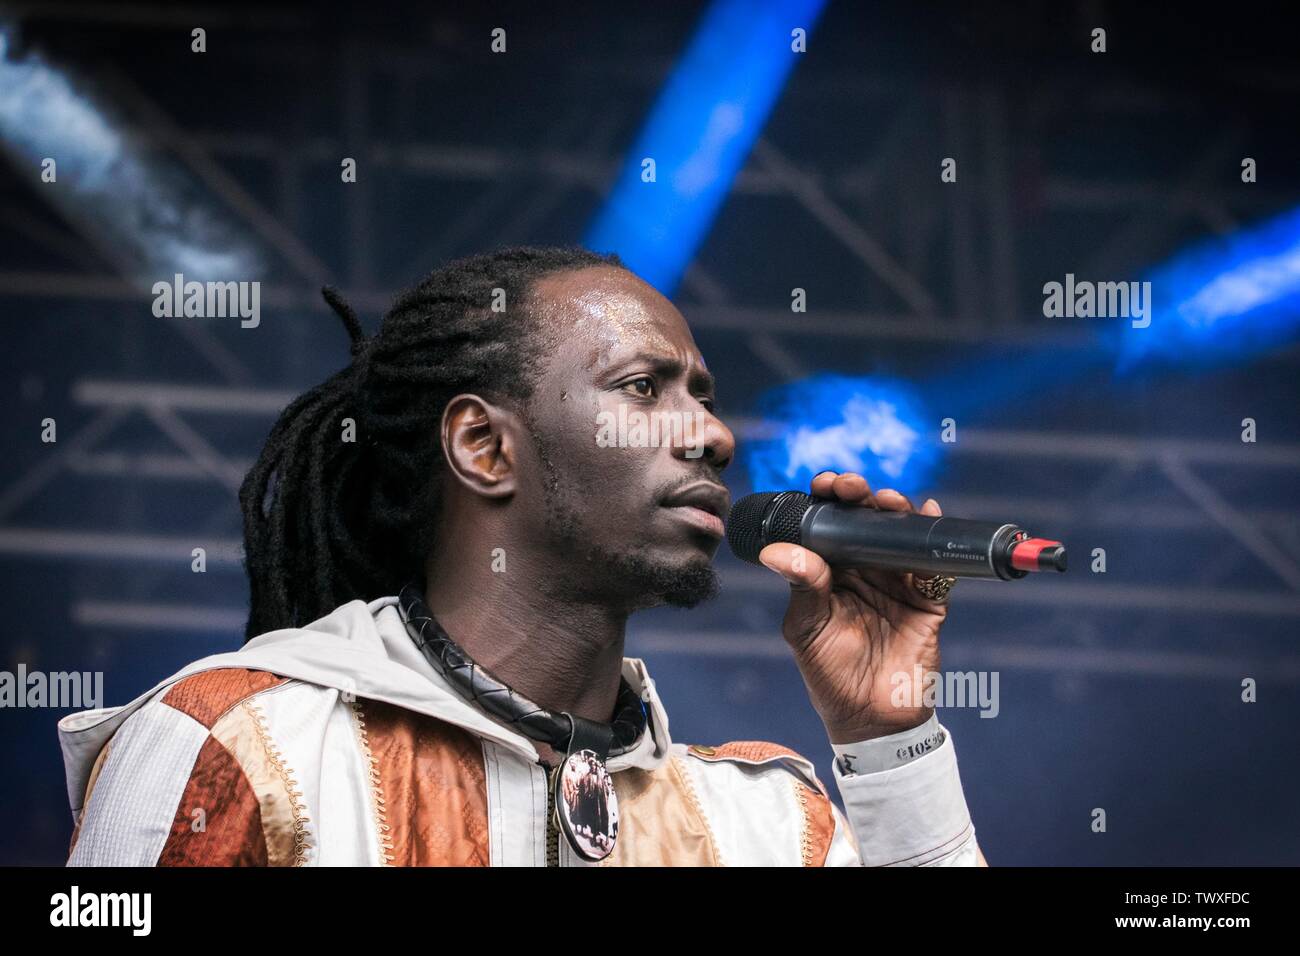 Liverpool, Merseyside, UK. 23rd June 2019. Africa Oye Music Festival.  Carlou D performs at the fantastic Africa Oyé Festival in Liverpool;s Sefton Park. The UK’s largest free celebration of African music and culture, takes place annually in Liverpool. Beginning in 1992 as a series of small gigs in the city centre, the event has gone from strength to strength, moving to its present Sefton Park home in 2002 to cope with demand.  Credit: Cernan Elias/Alamy Live News Stock Photo